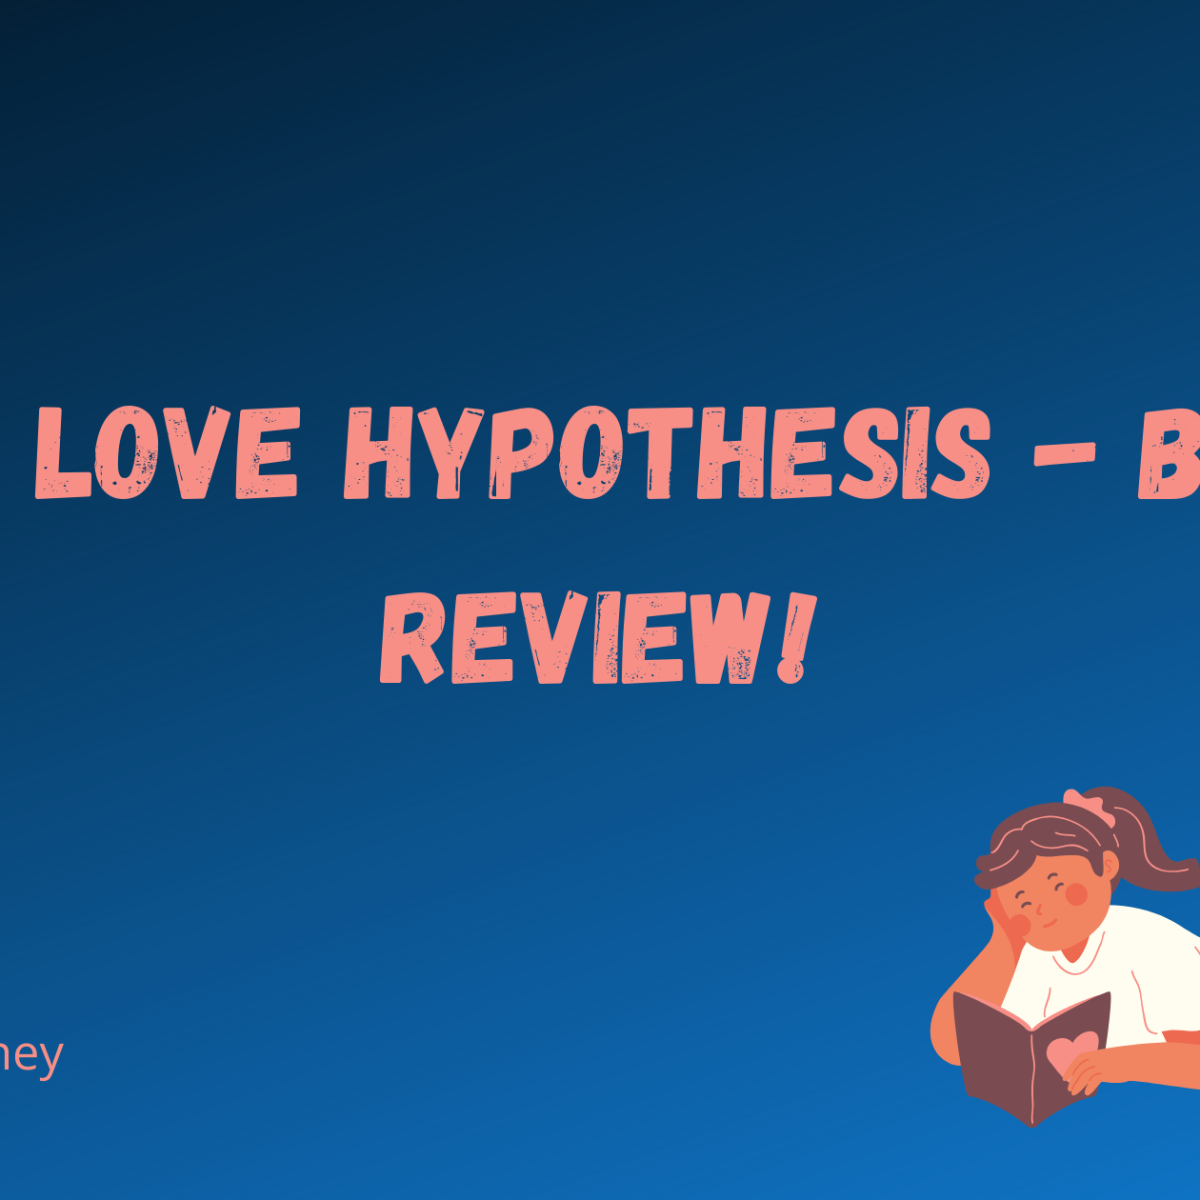 The love hypothesis – Book review